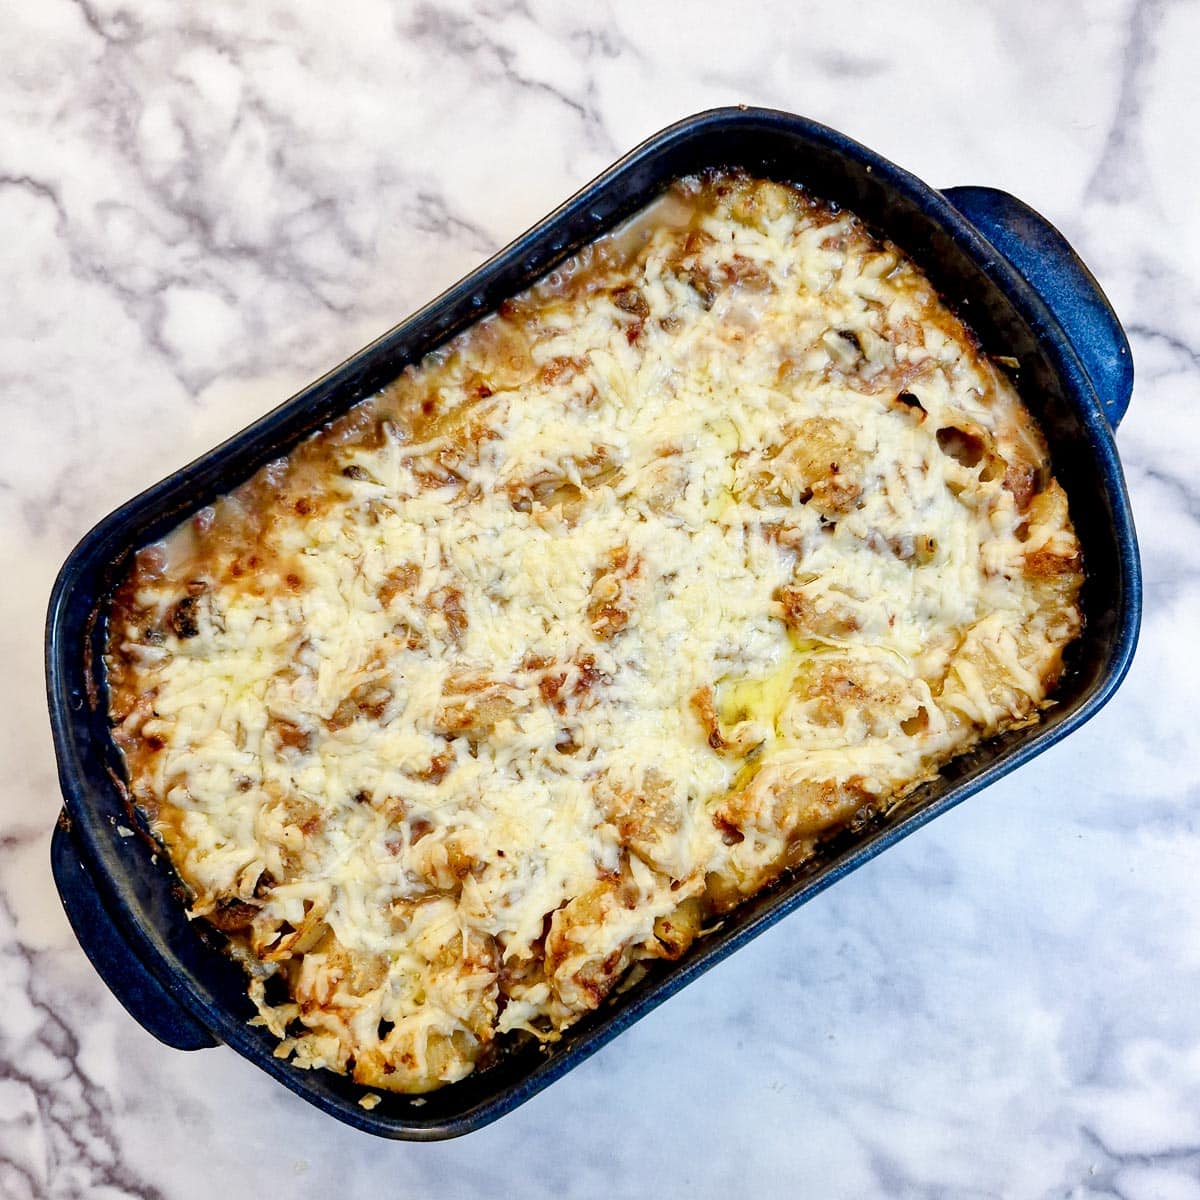 A dish of baked bully beef pasta covered with melted cheese.